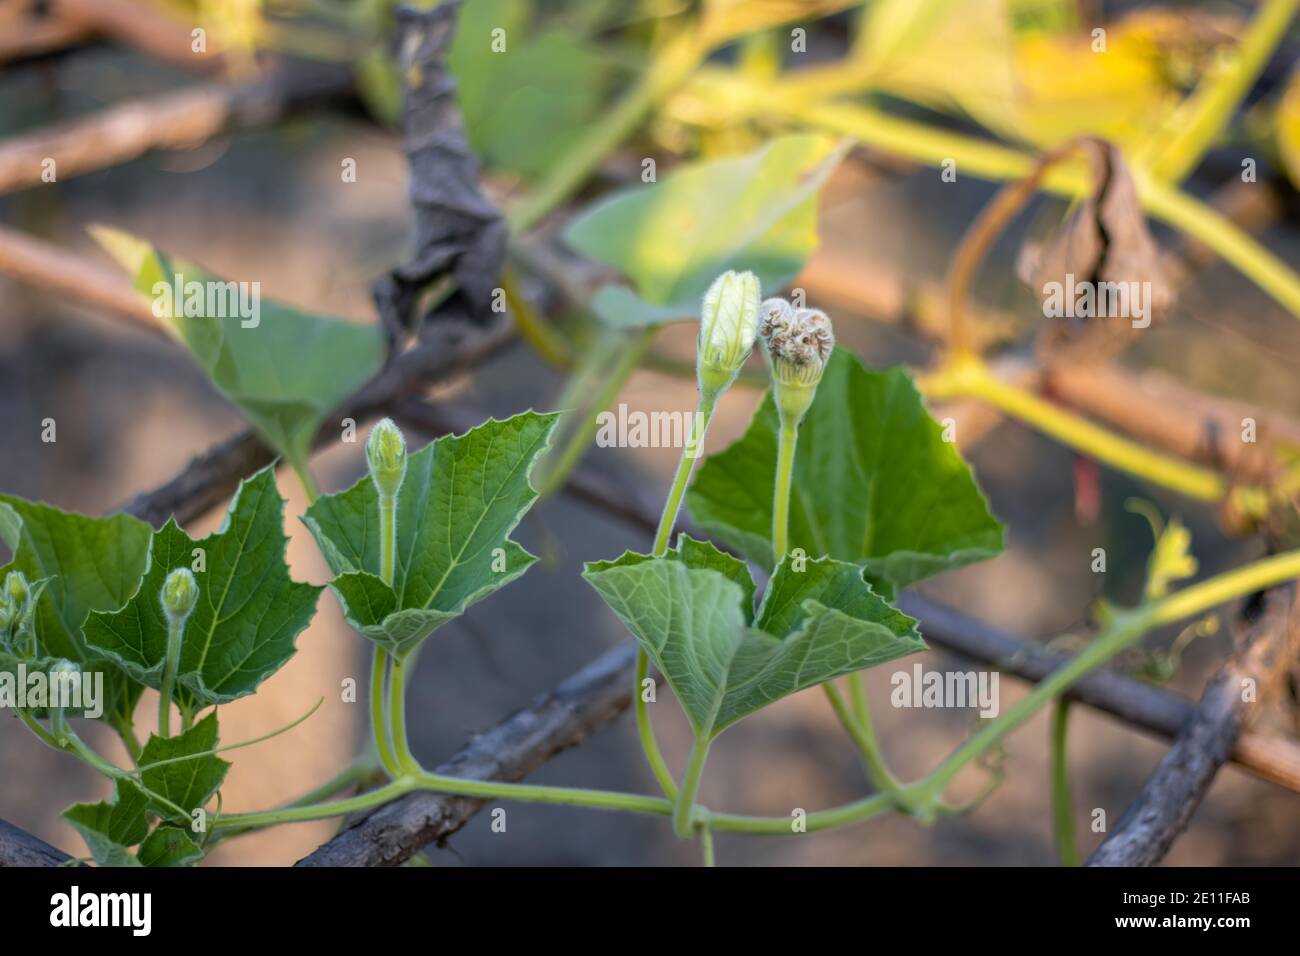 Two closed bottle gourd flowers on the loft with green leaves Stock Photo